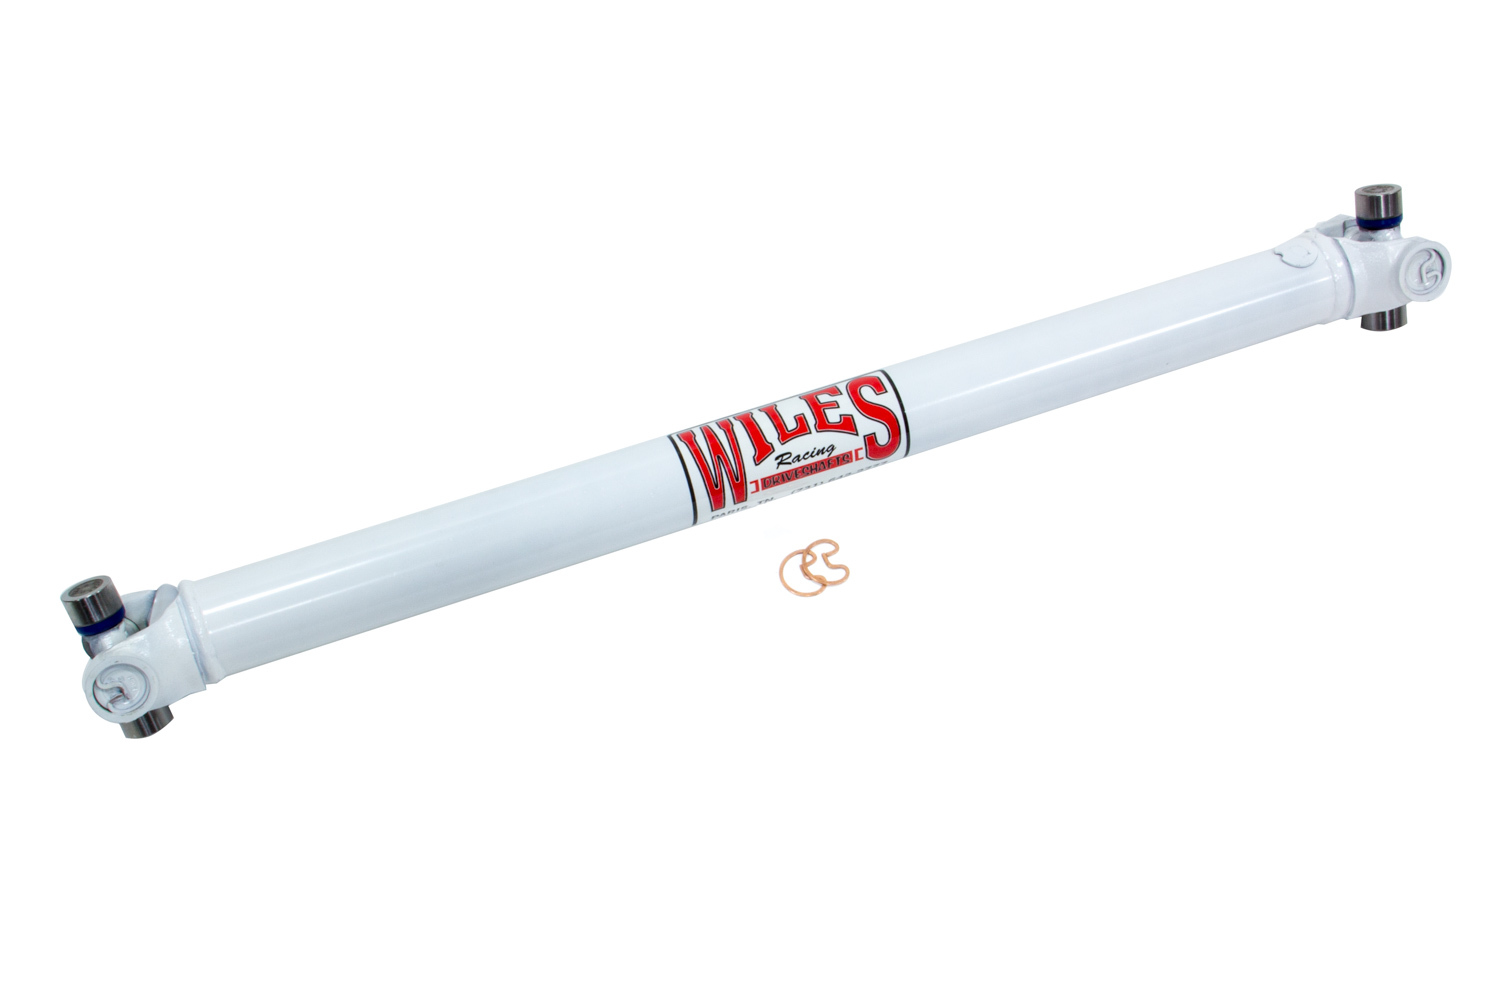 Wiles Driveshaft S295355 Drive Shaft, 35.500 in Long, 2 in OD, 1310 U-Joints, Steel, White Paint, Universal, Each